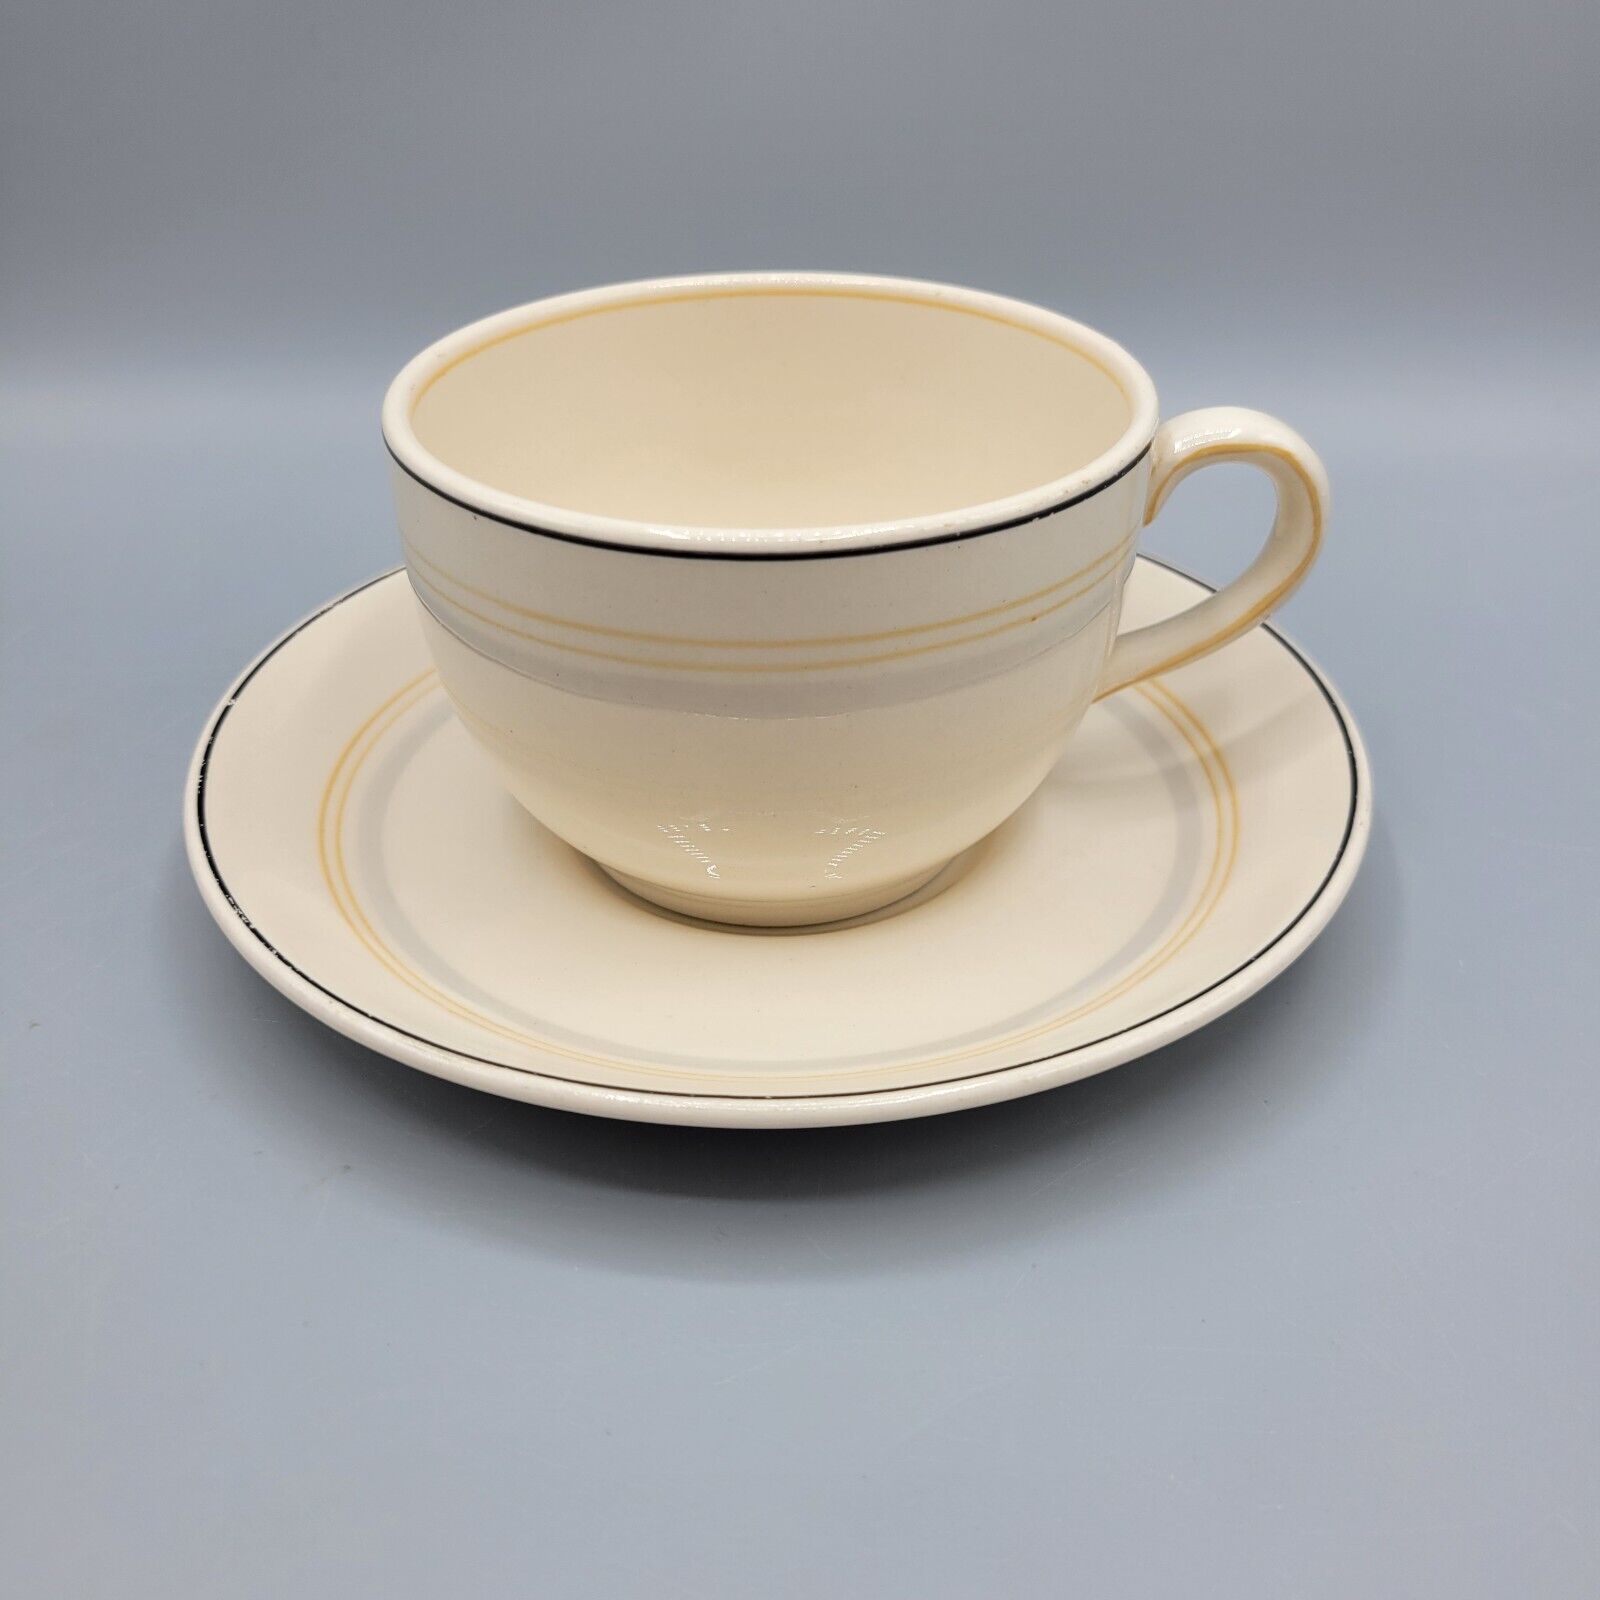 Maddock Ivory Ware Teacup & Saucer, The Cunard Steamship Co Lmtd, England 